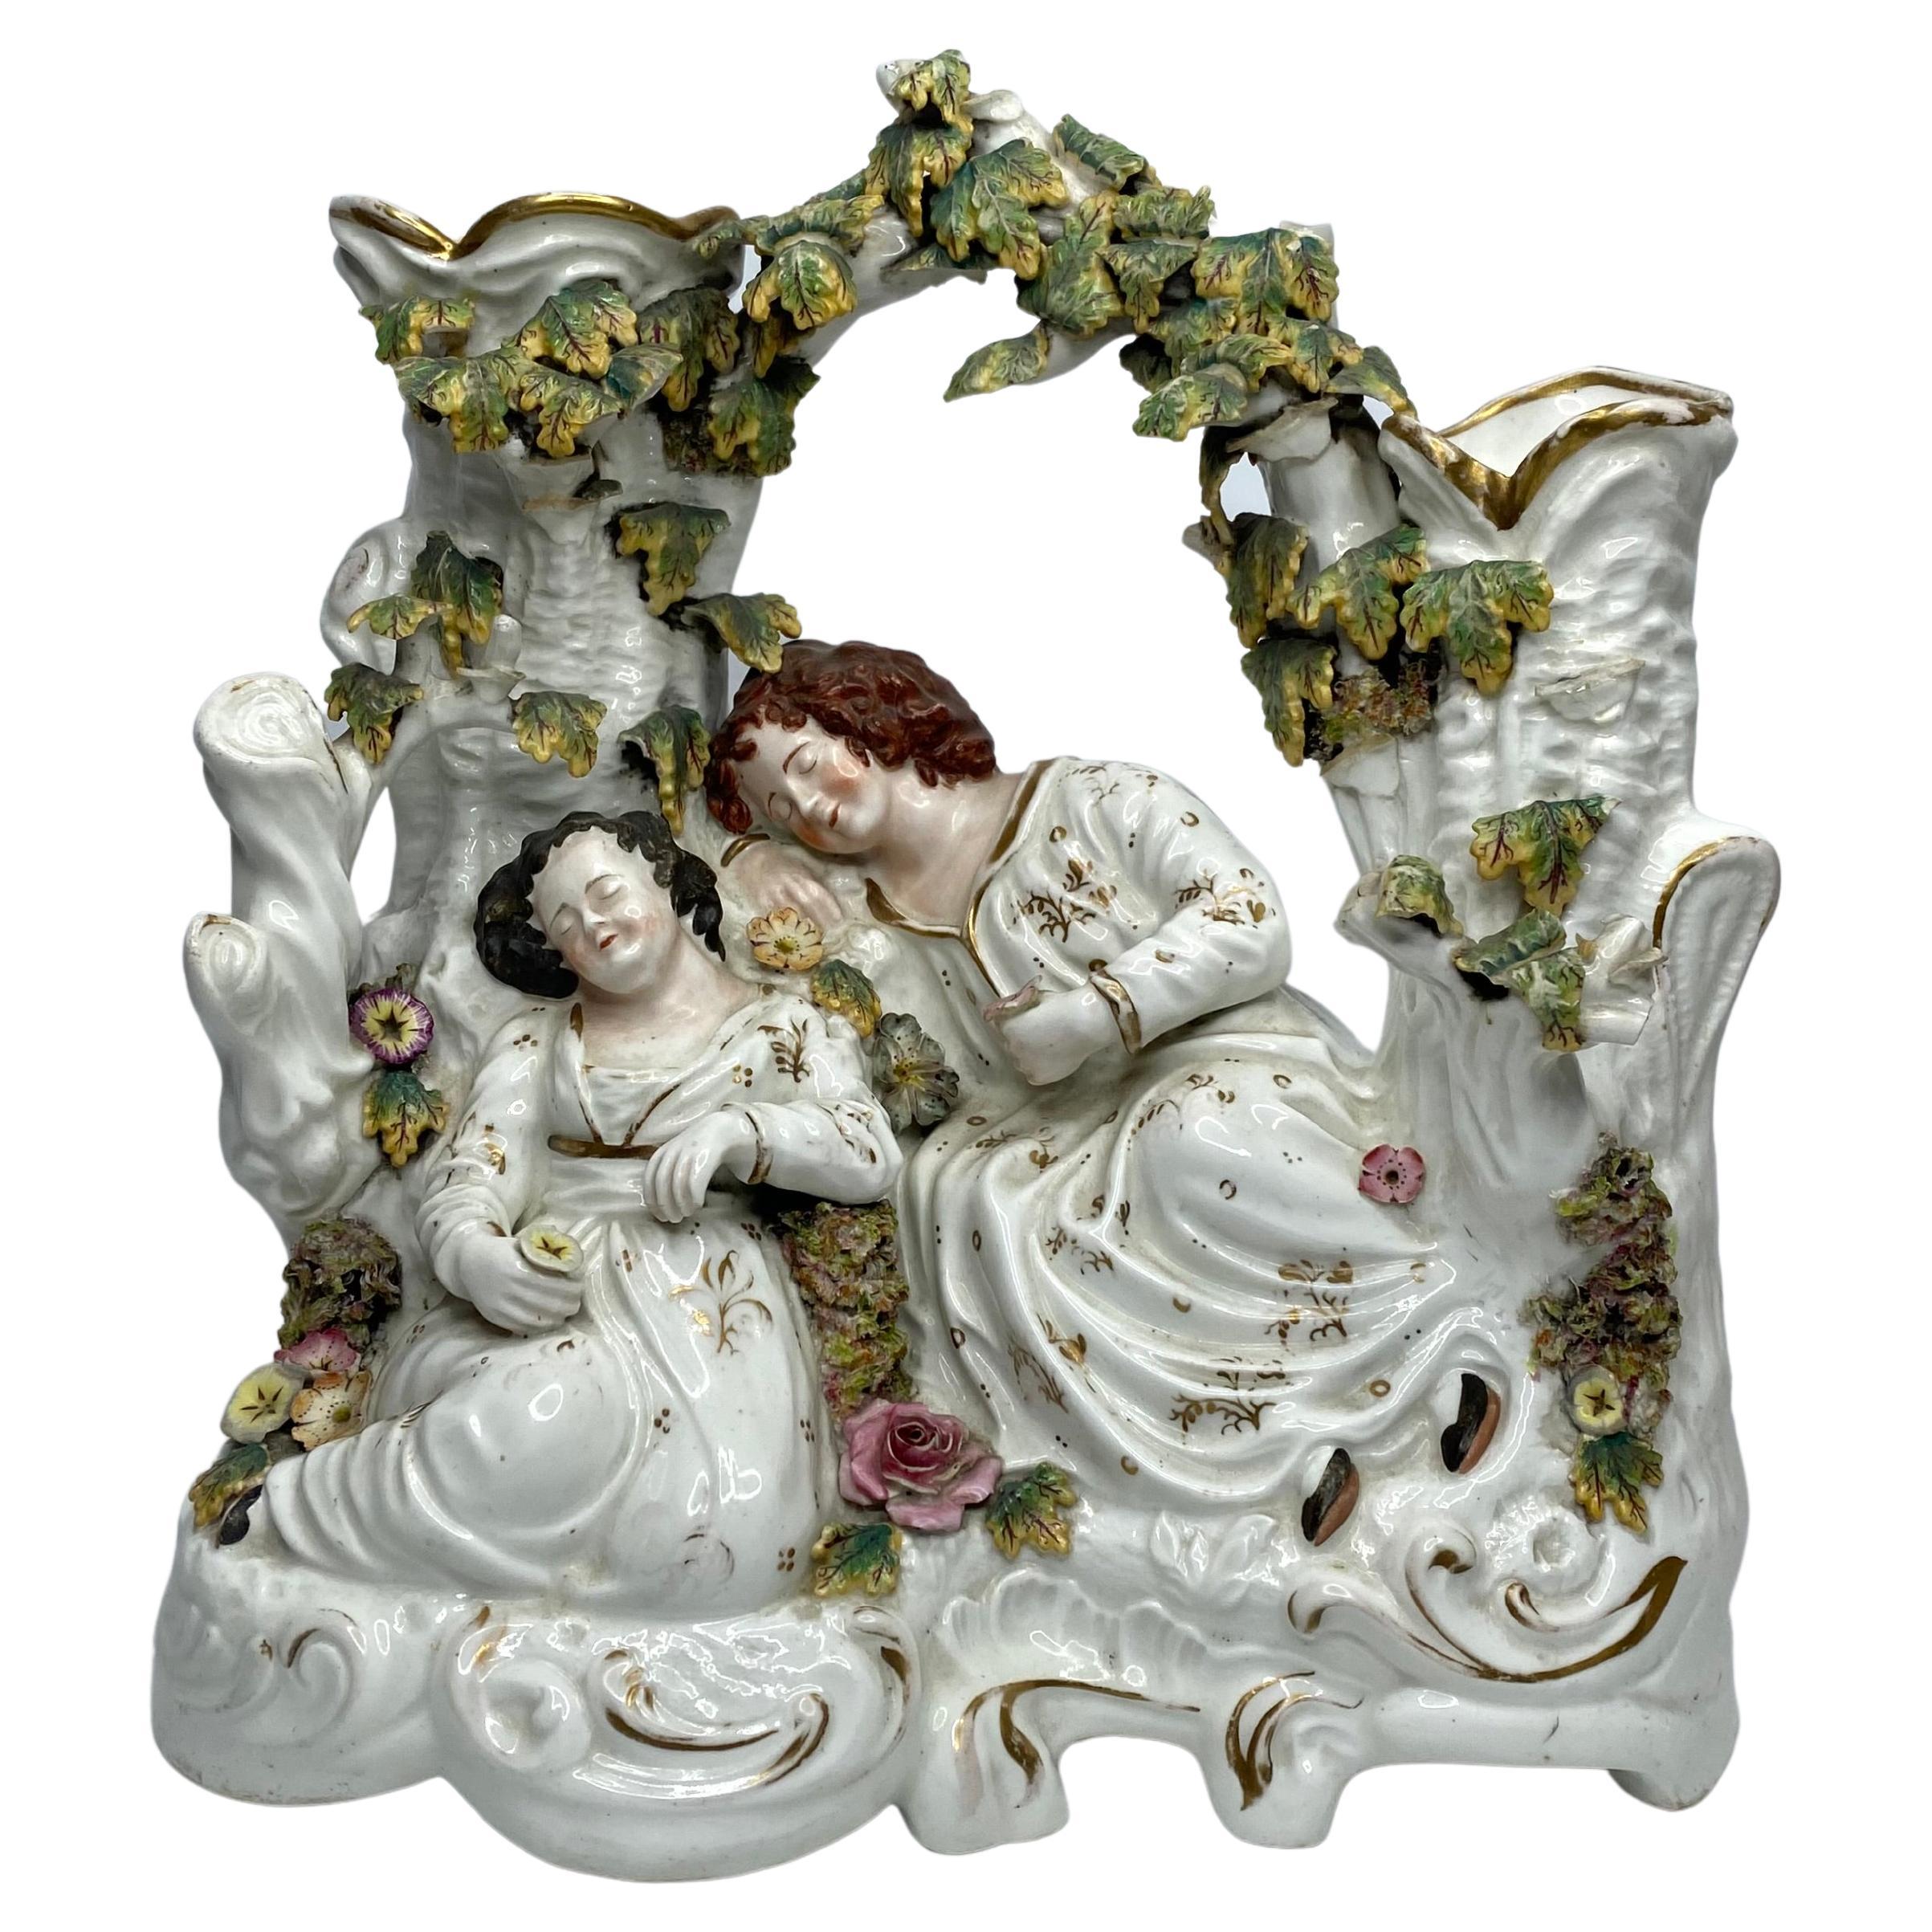 Rare and large Staffordshire porcelaneous ‘Babes in the Woods’ group, c. 1830.